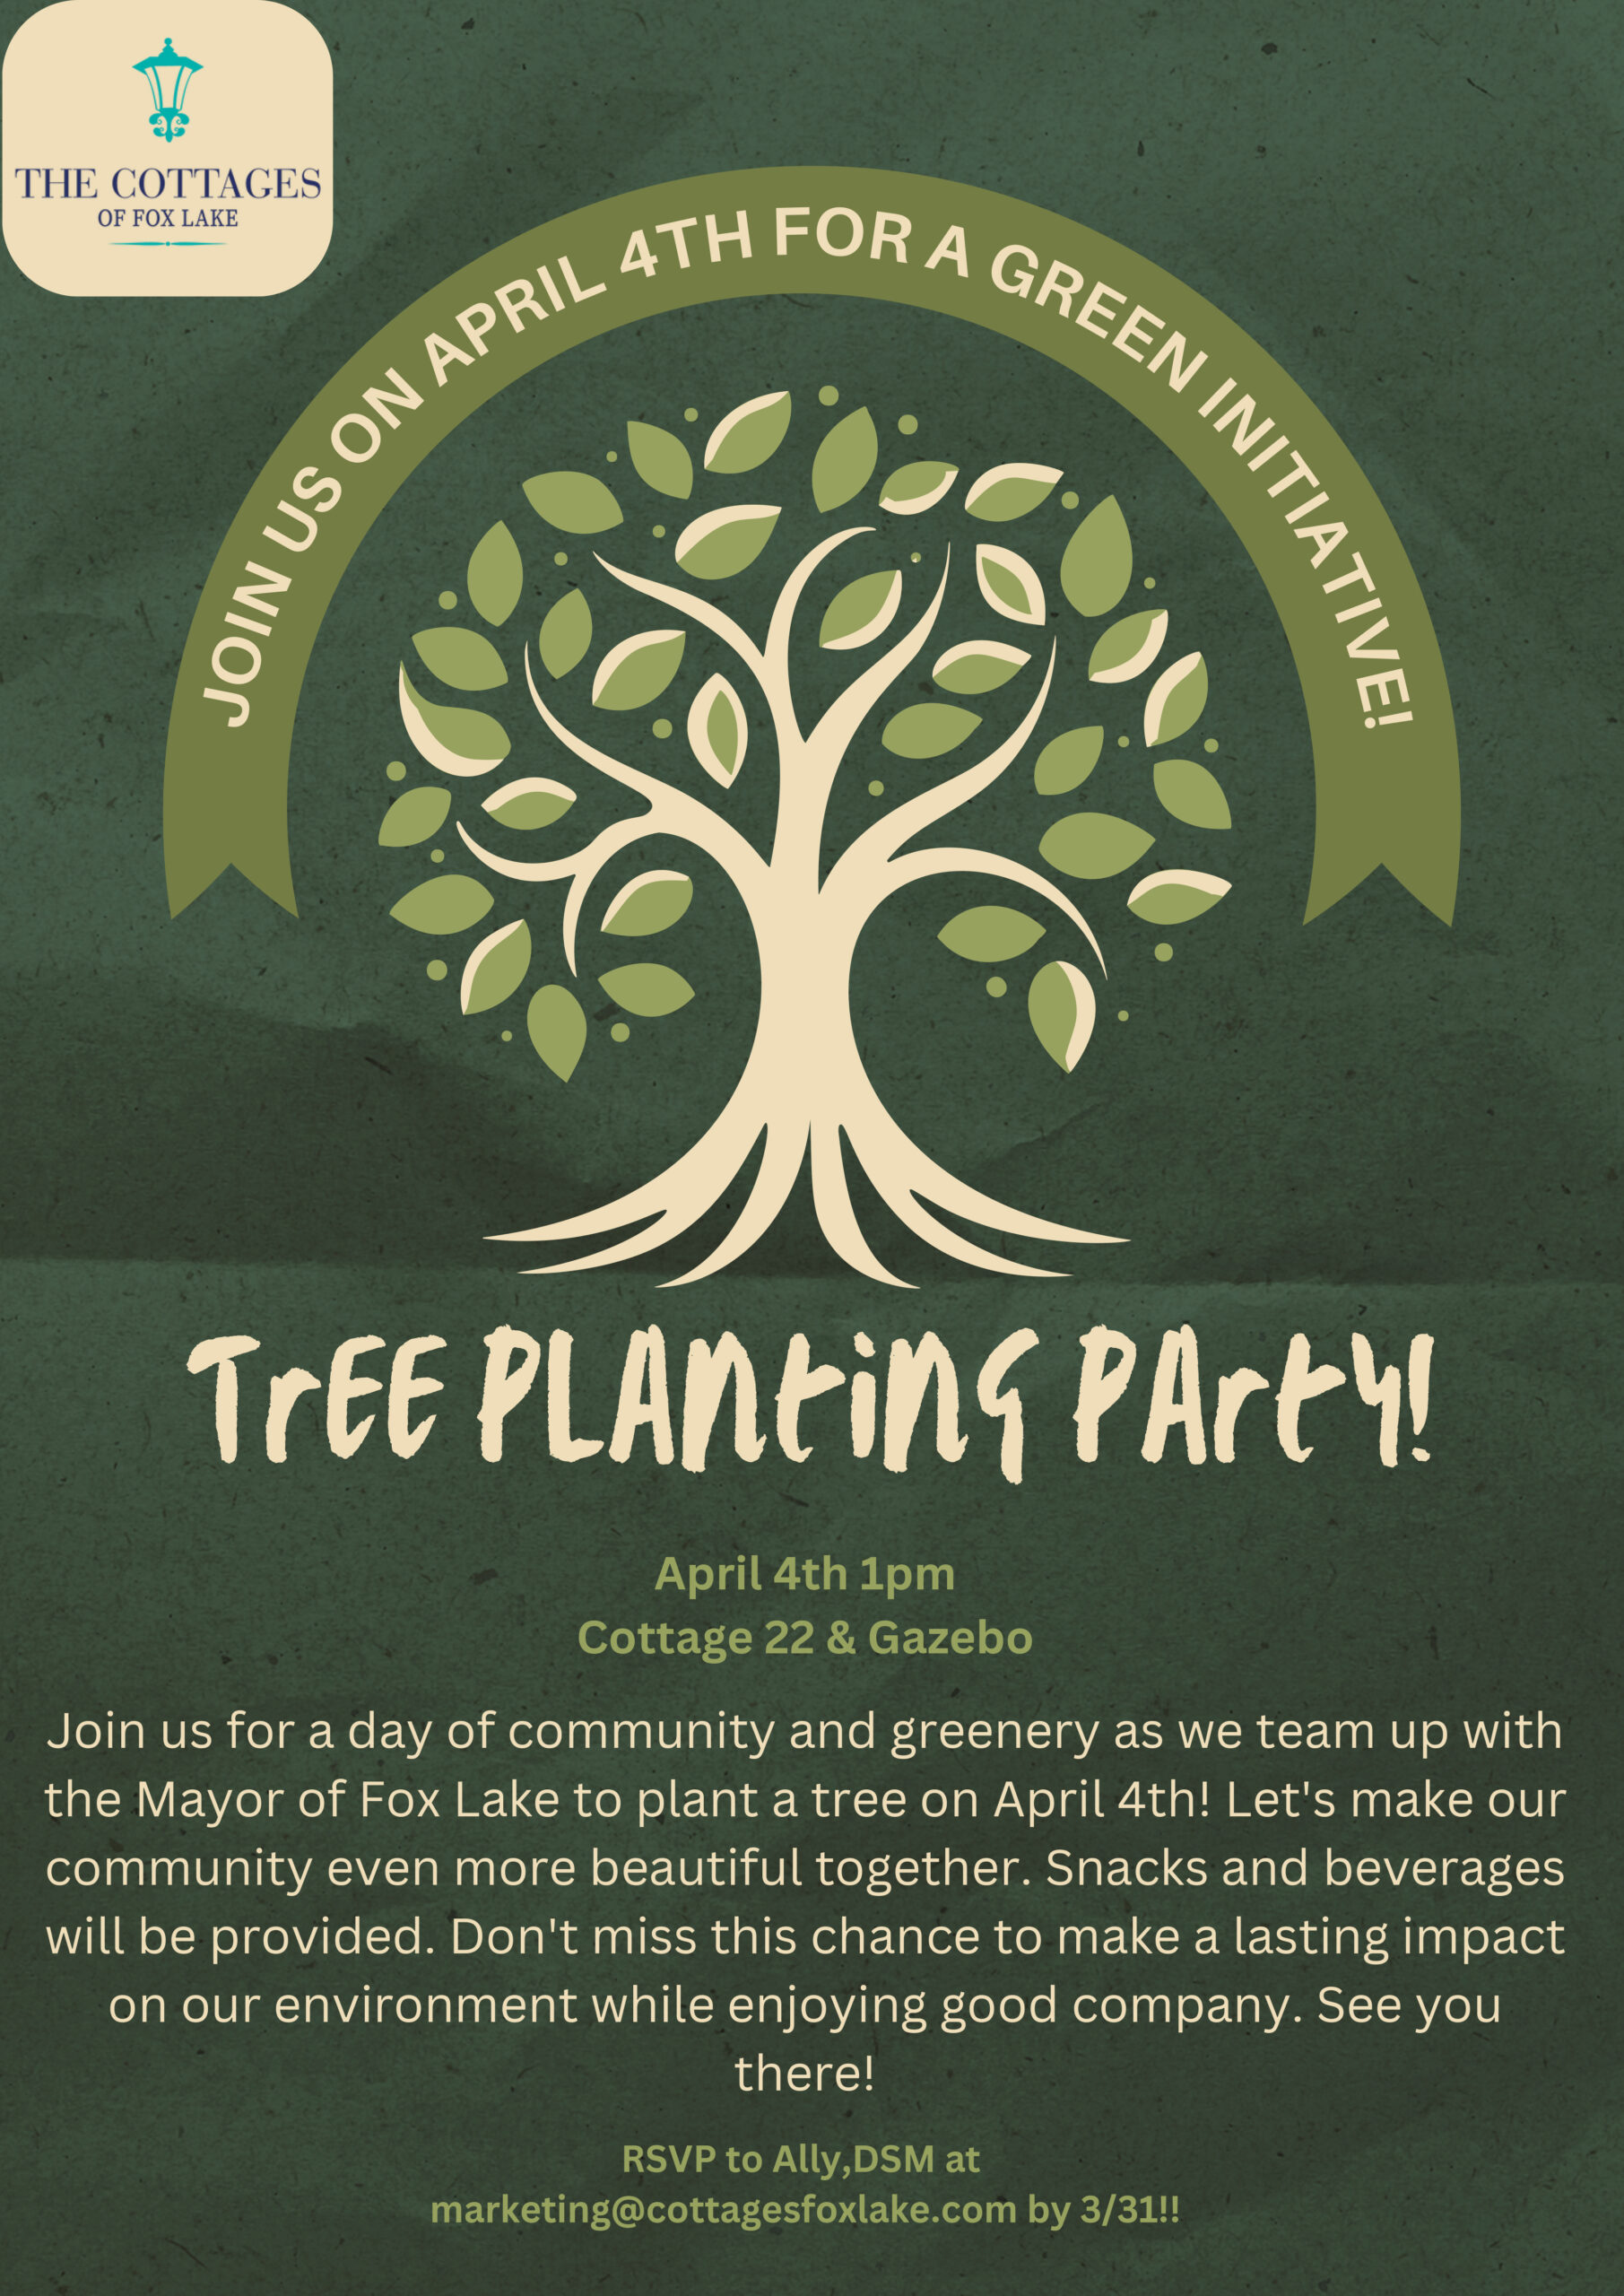 Cottages of Fox Lake - Assisted Living and Memory Care - Tree Planting Party